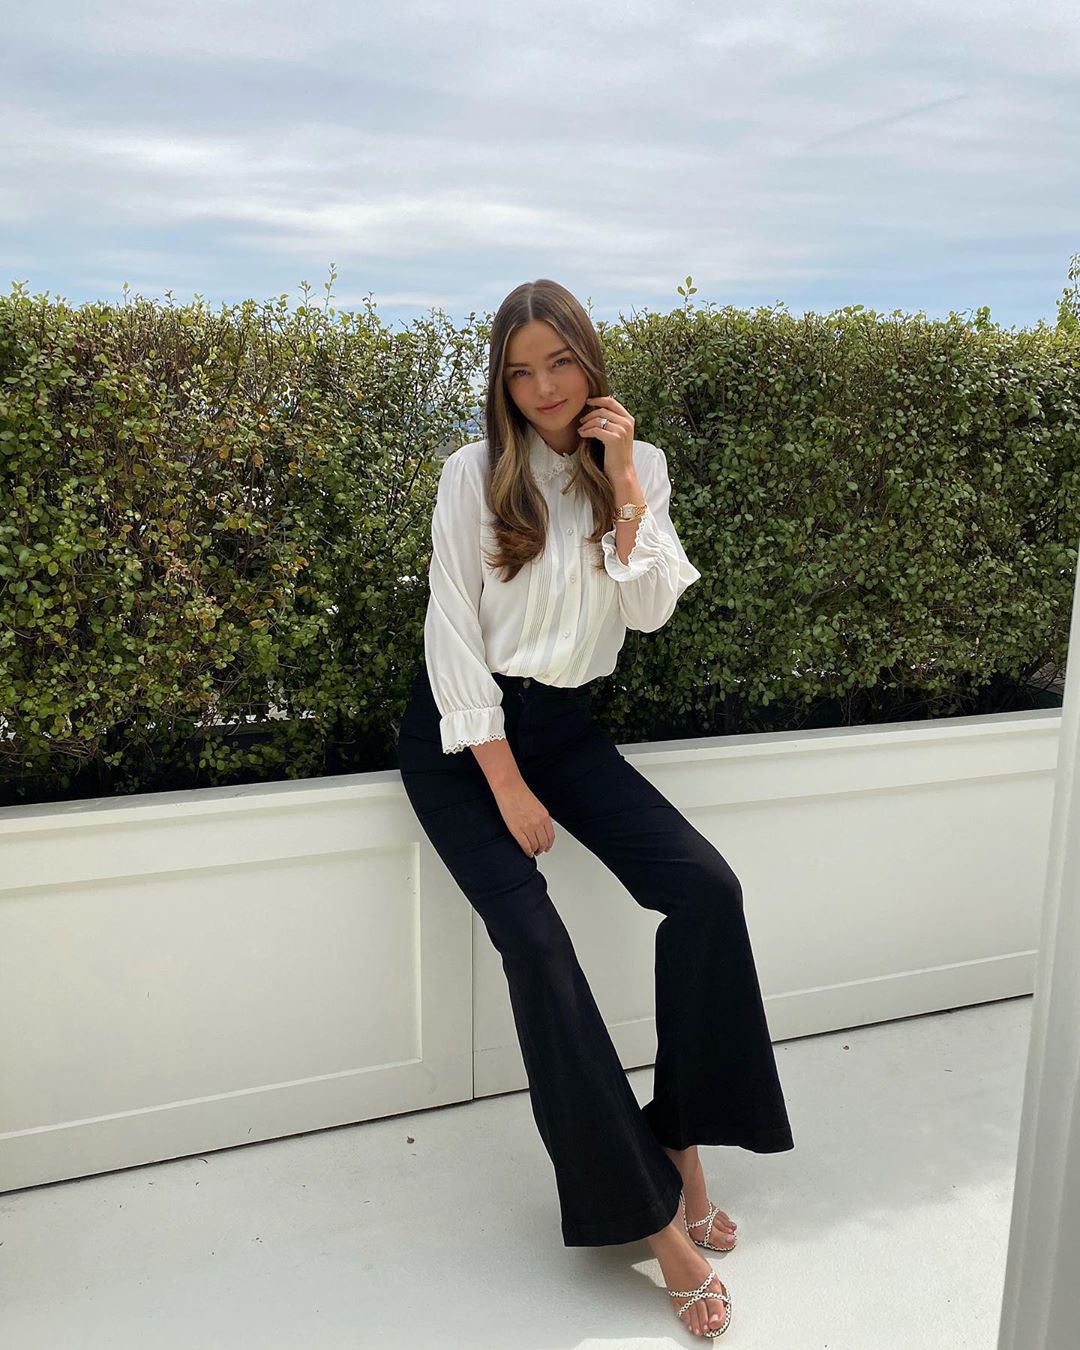 Miranda Kerr has a series of formulas for dressing super young and beautiful, no wonder few people expect her to be 37 years old - Photo 8.